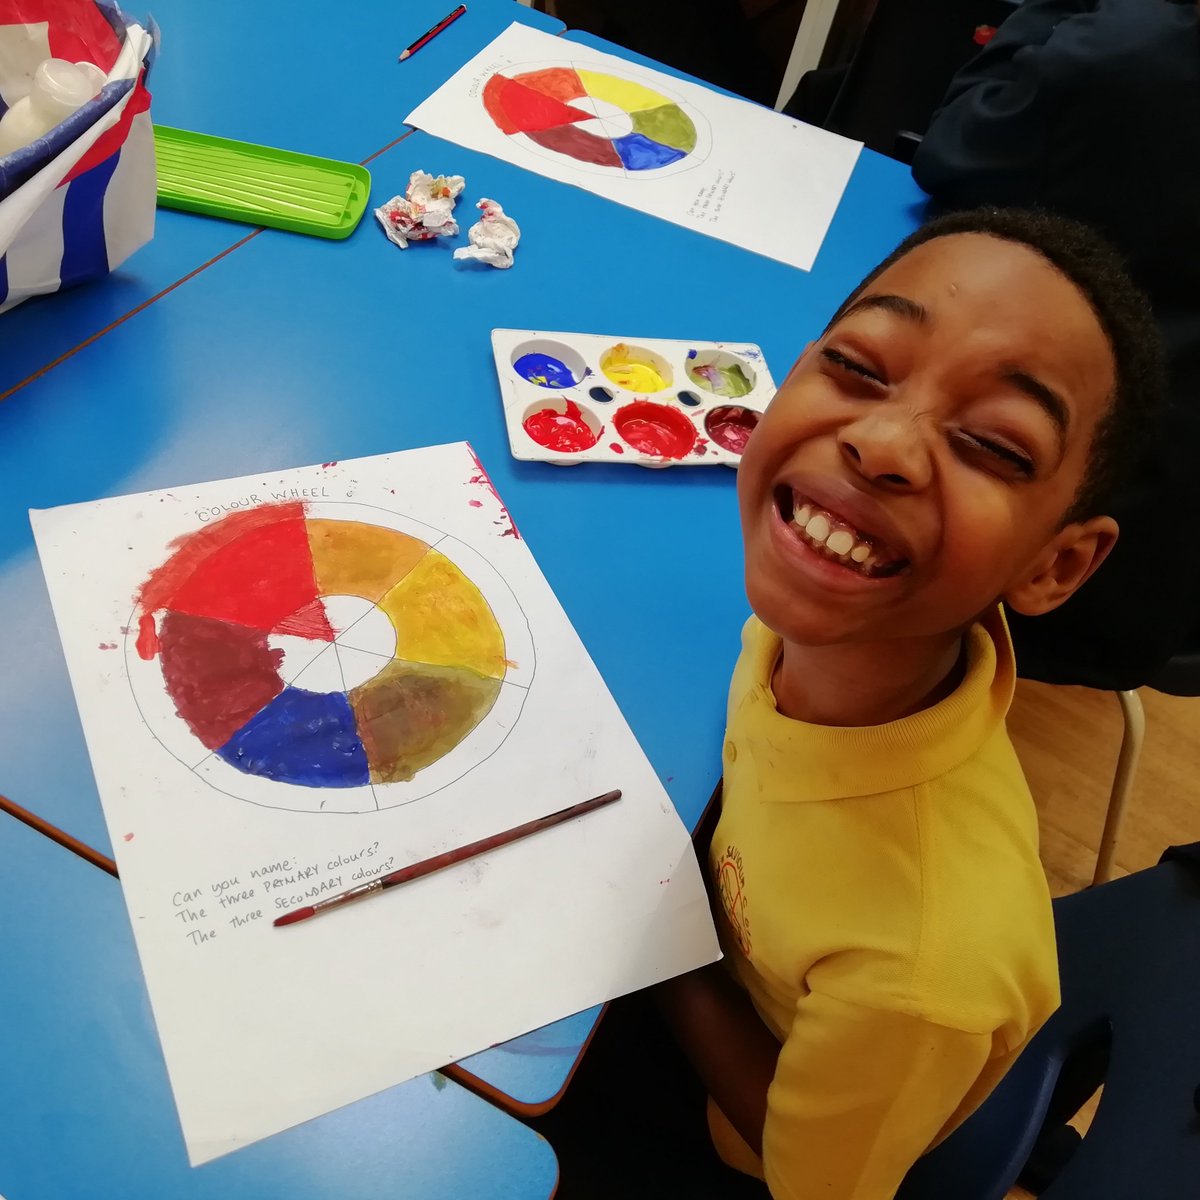 We were all full of smiles today at Saviour Primary this morning but this one was definitely my favourite! 😁 Lovely session on Colour Theory, well done Y5.
#primaryrocks #artinschools #everychildanartist #colourtheory